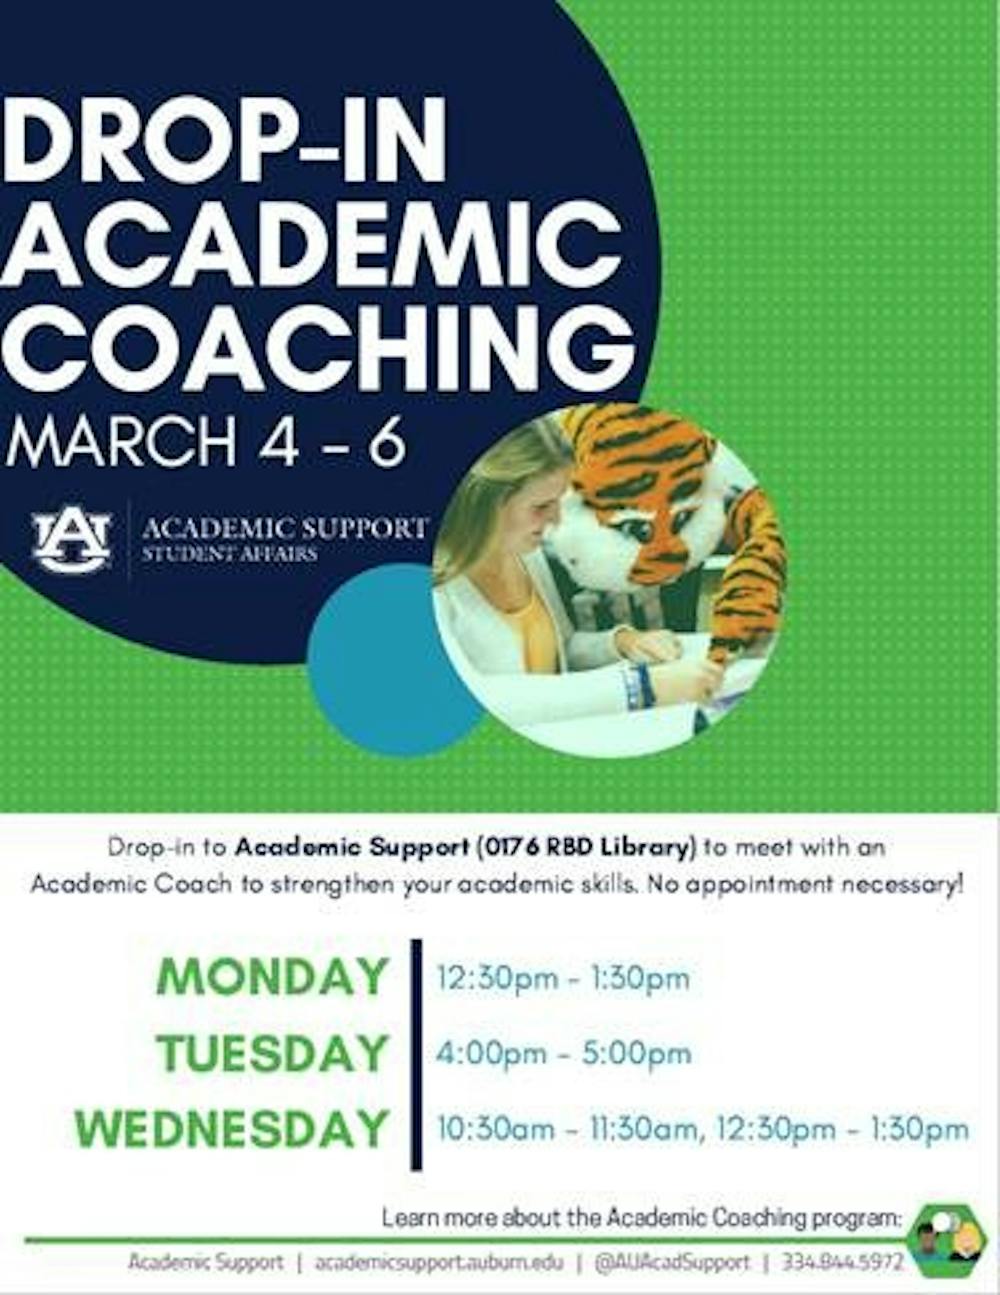 <p>Academic Coaching will continue to offer free, drop-in sessions for mid-term week March 4-6, 2019.</p>